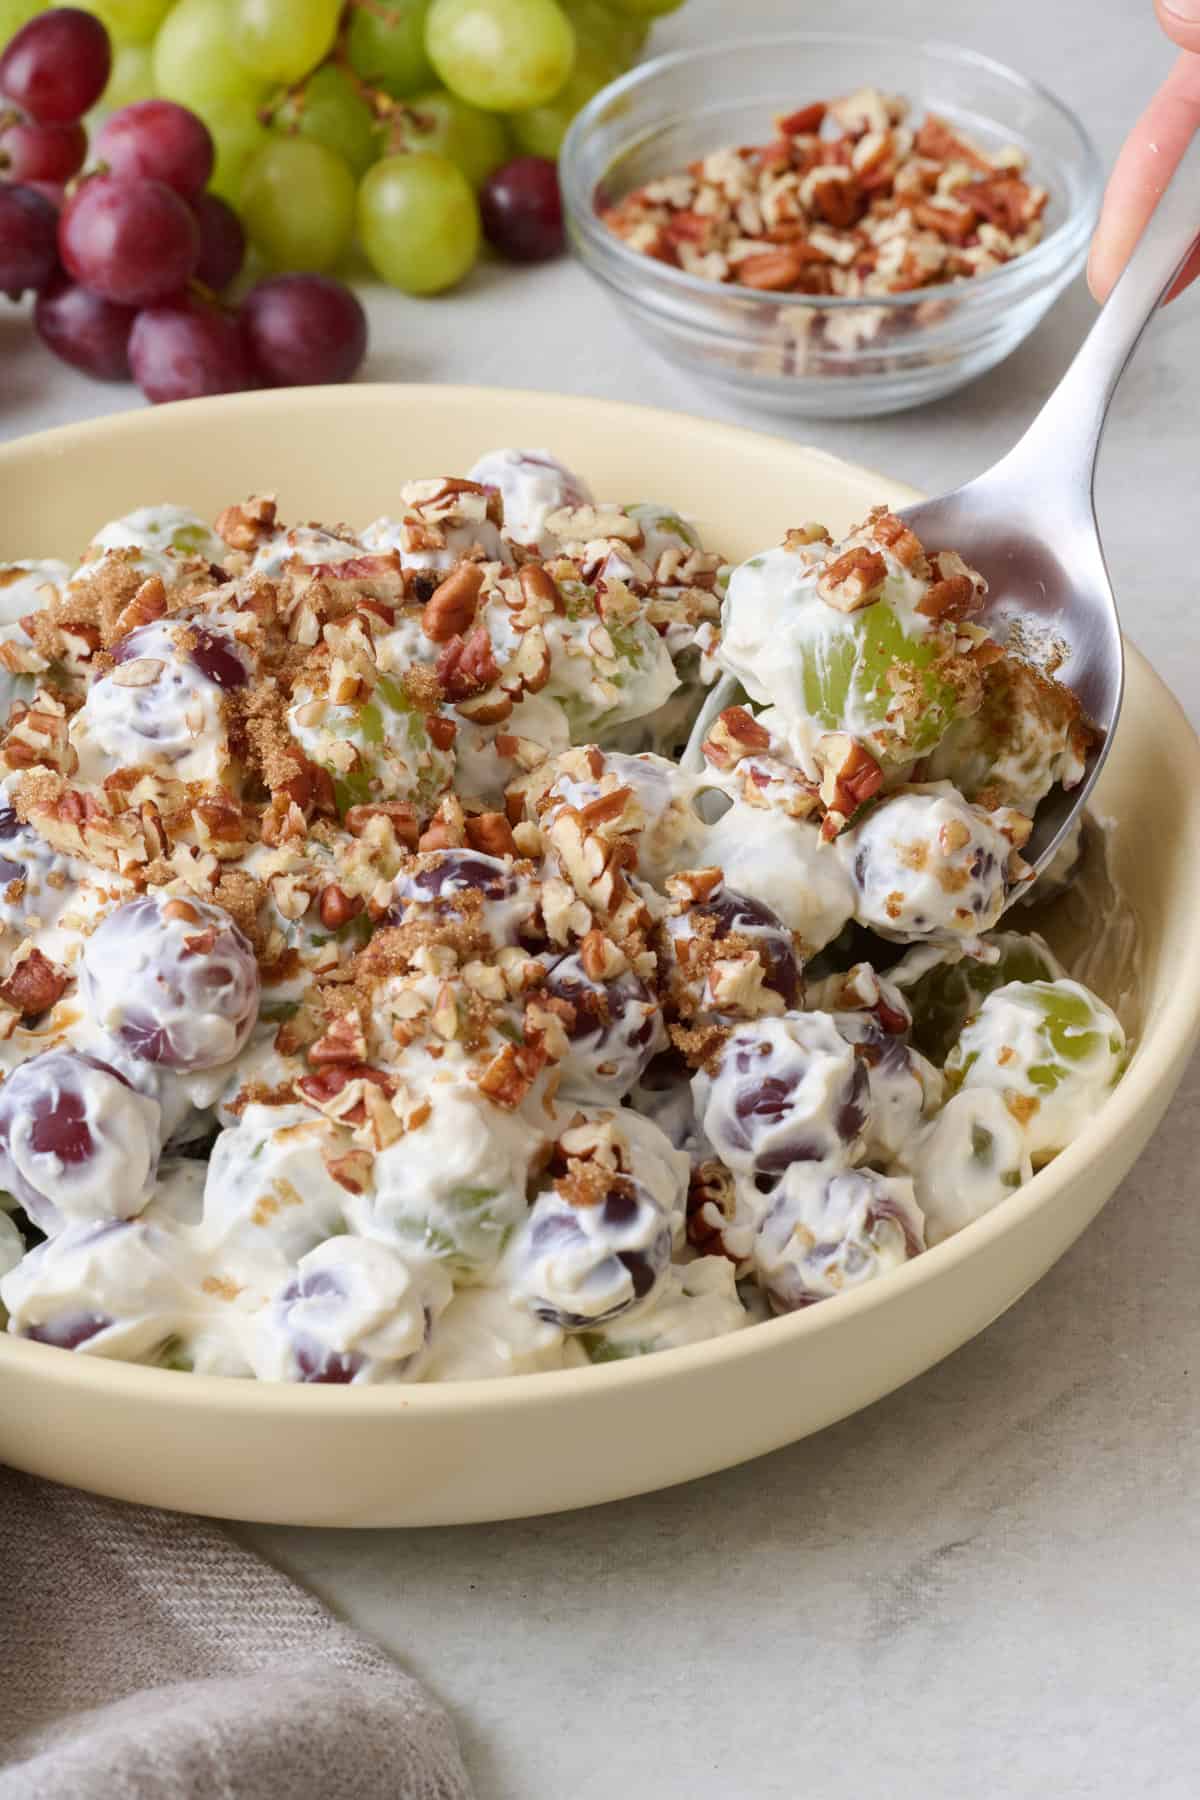 Spoon scooping grape salad with chopped pecans from a bowl with fresh grapes and bowl of chopped pecans nearby.